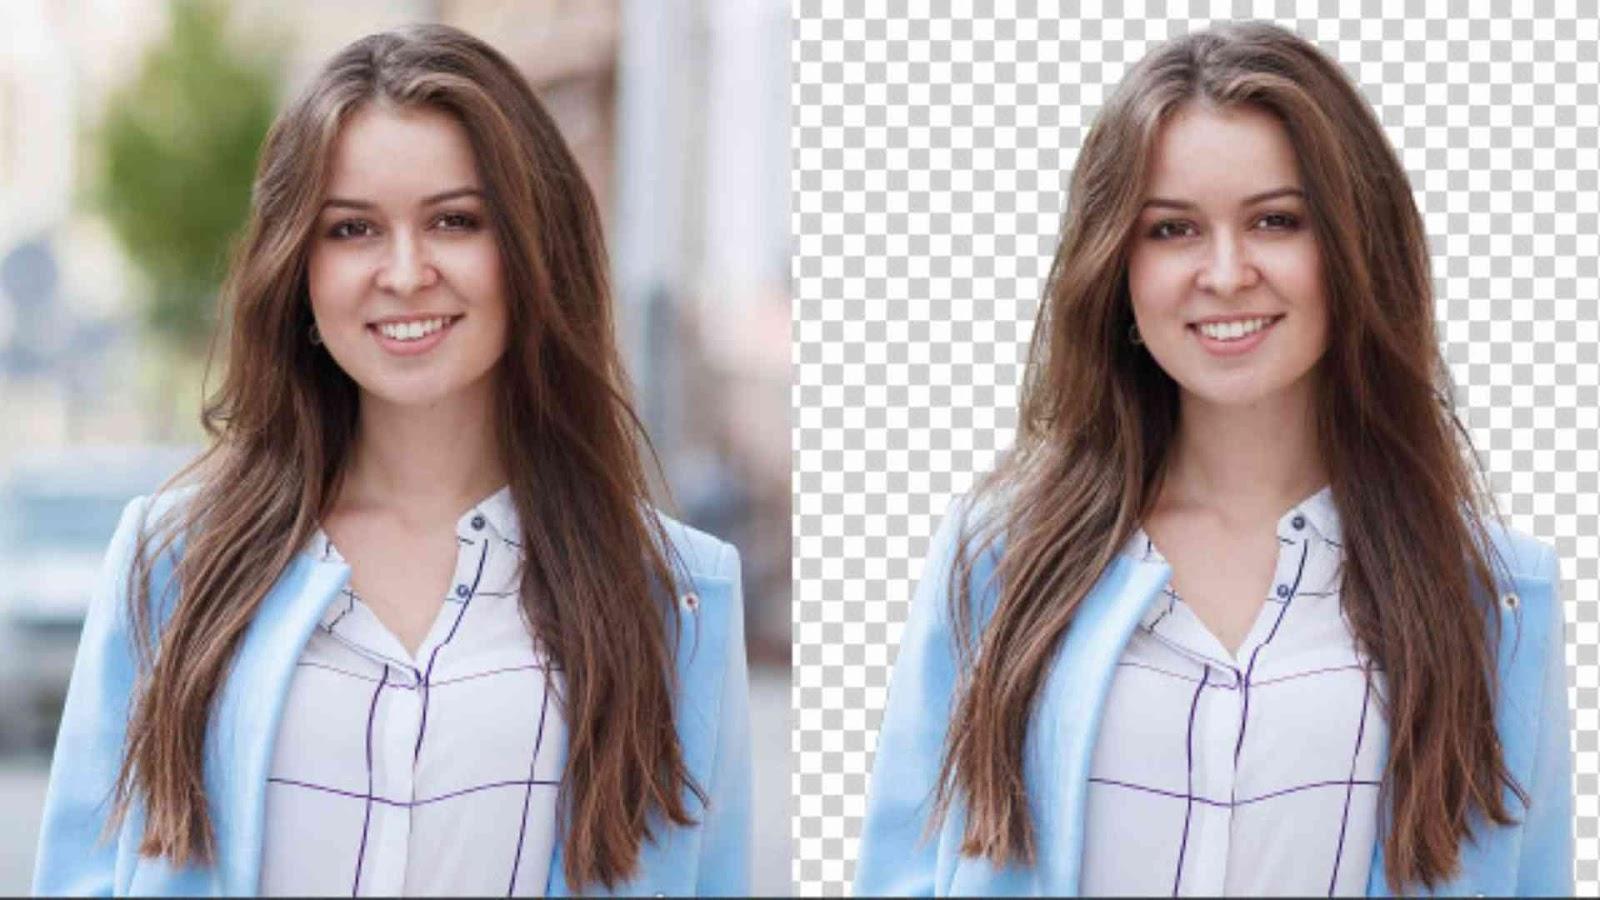 What is Adobe Background Remover